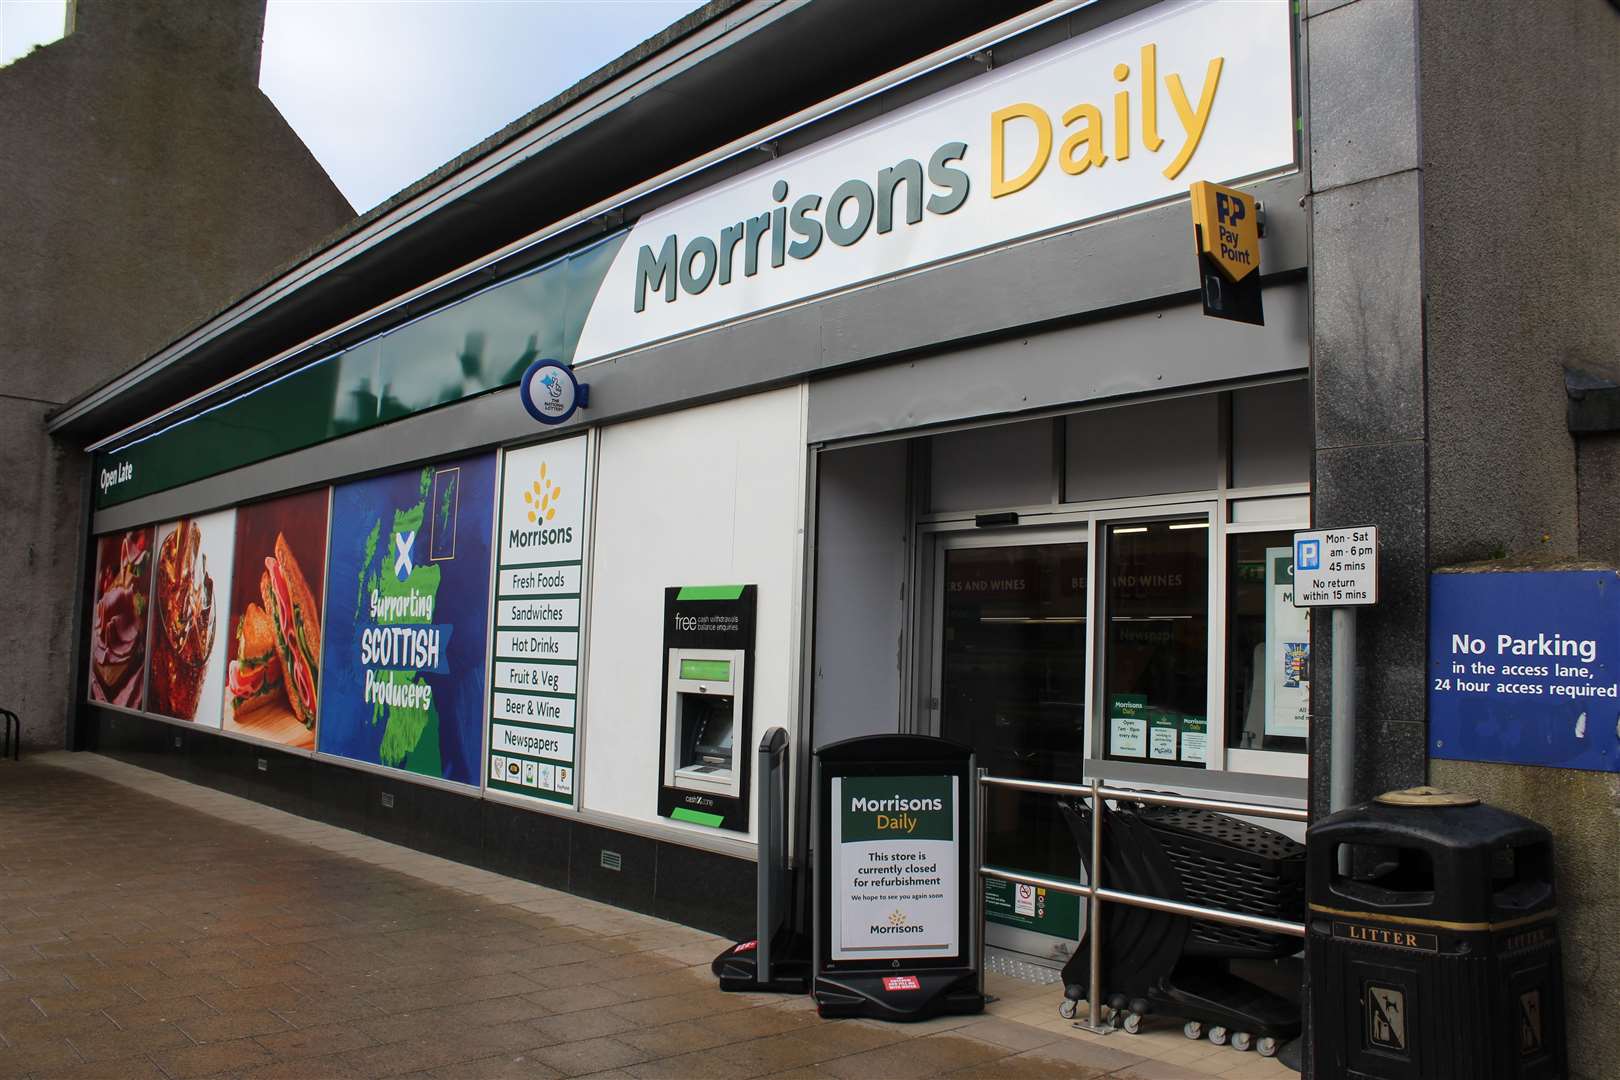 Morrisons has taken formal ownership of branches which were previously operated by R S McColls including the one in Banff.